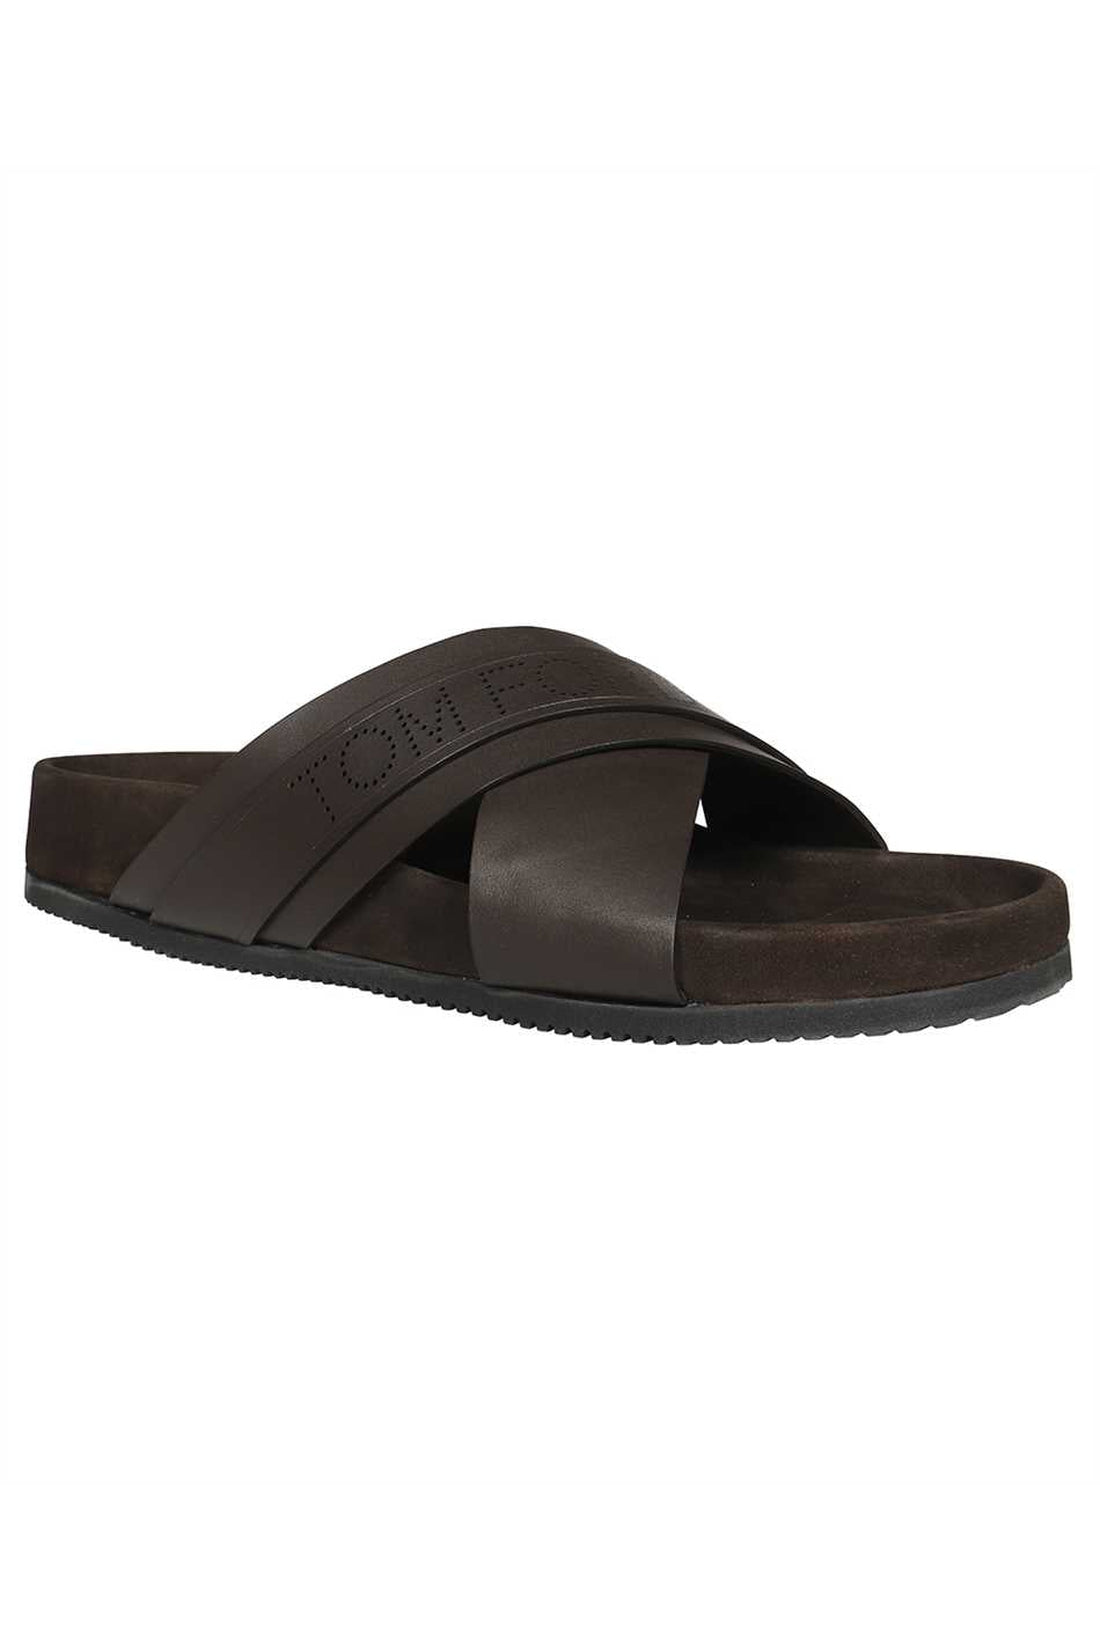 Tom Ford-OUTLET-SALE-Wicklow leather slides-ARCHIVIST